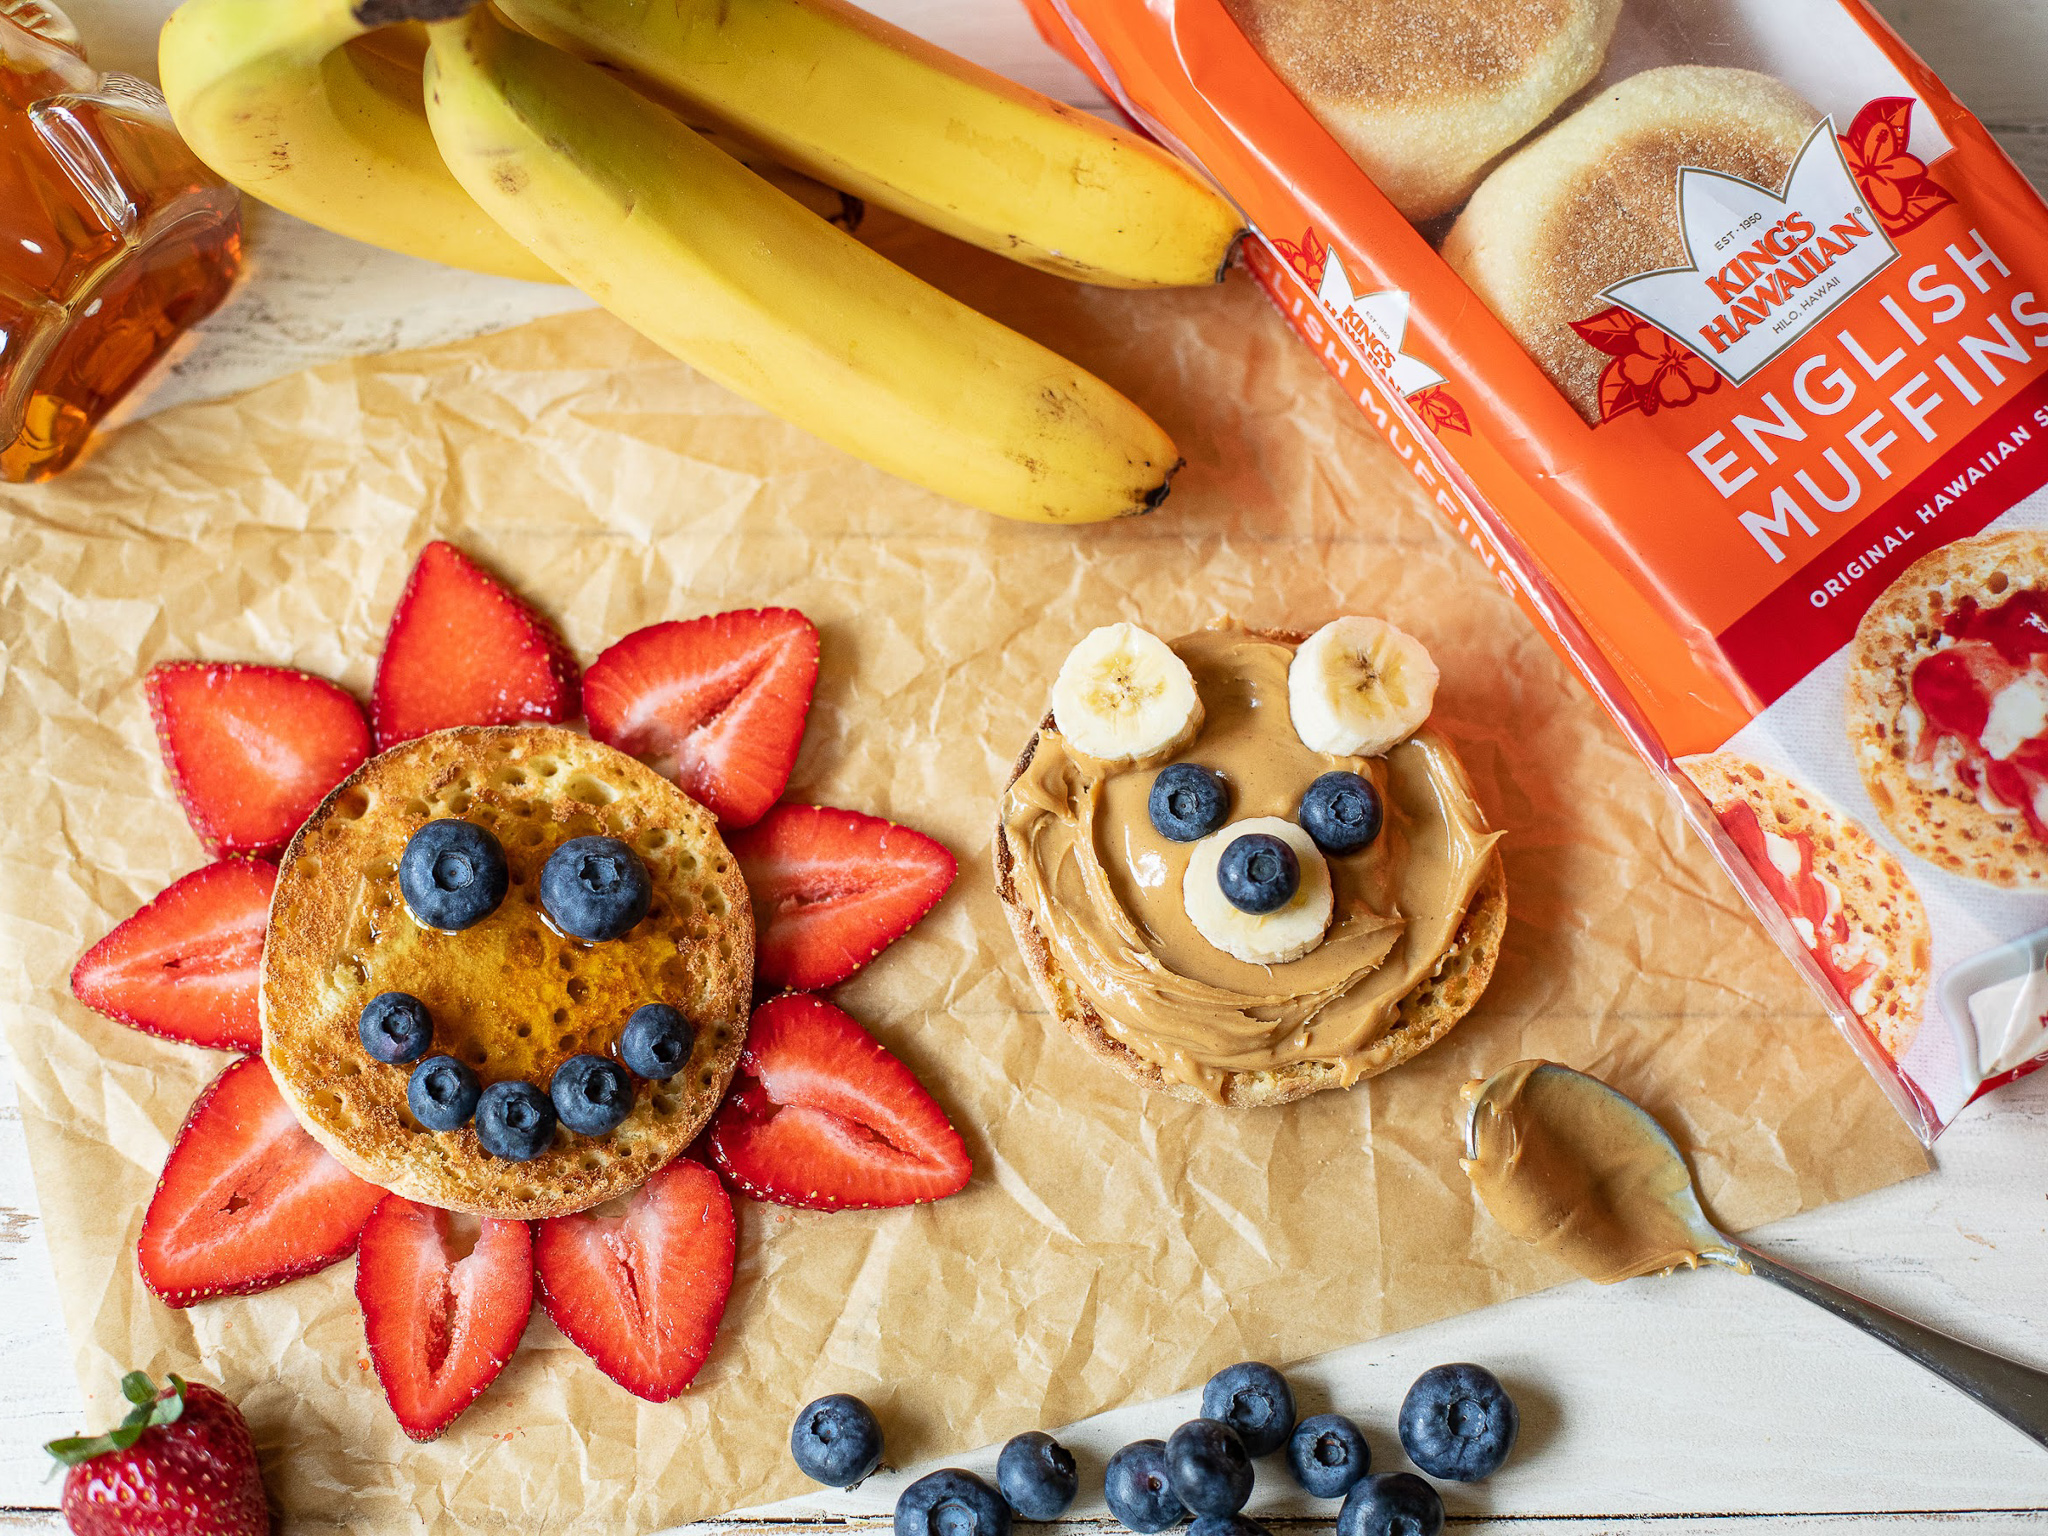 Send The Kids Back To School With The Great Taste Of King's Hawaiian English Muffins - Available Now At Select Locations on I Heart Publix